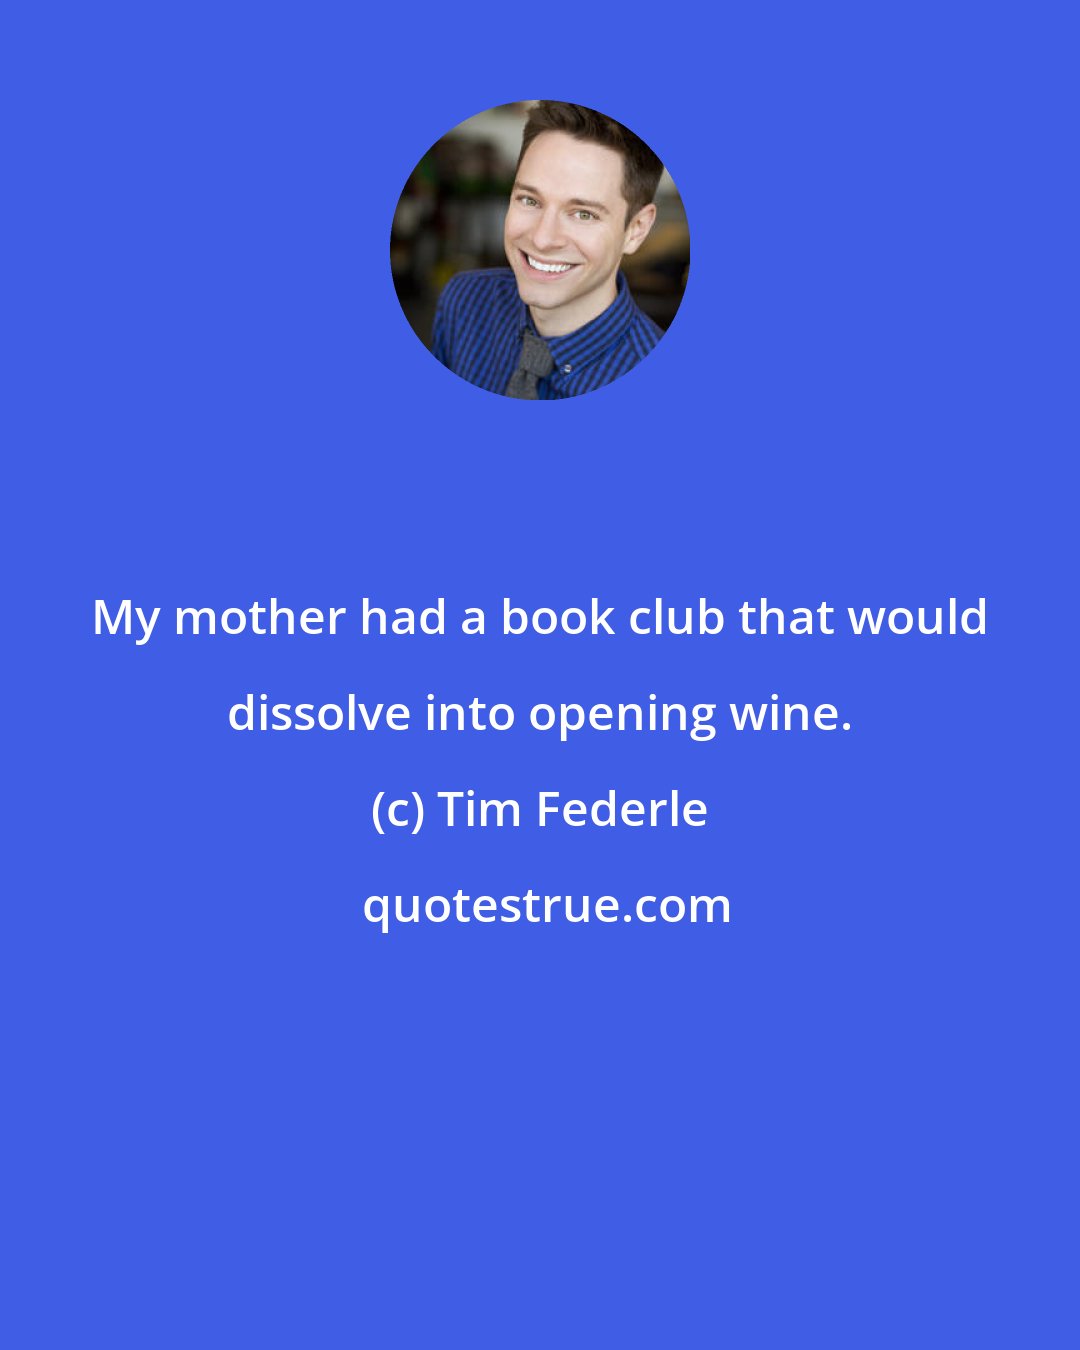 Tim Federle: My mother had a book club that would dissolve into opening wine.